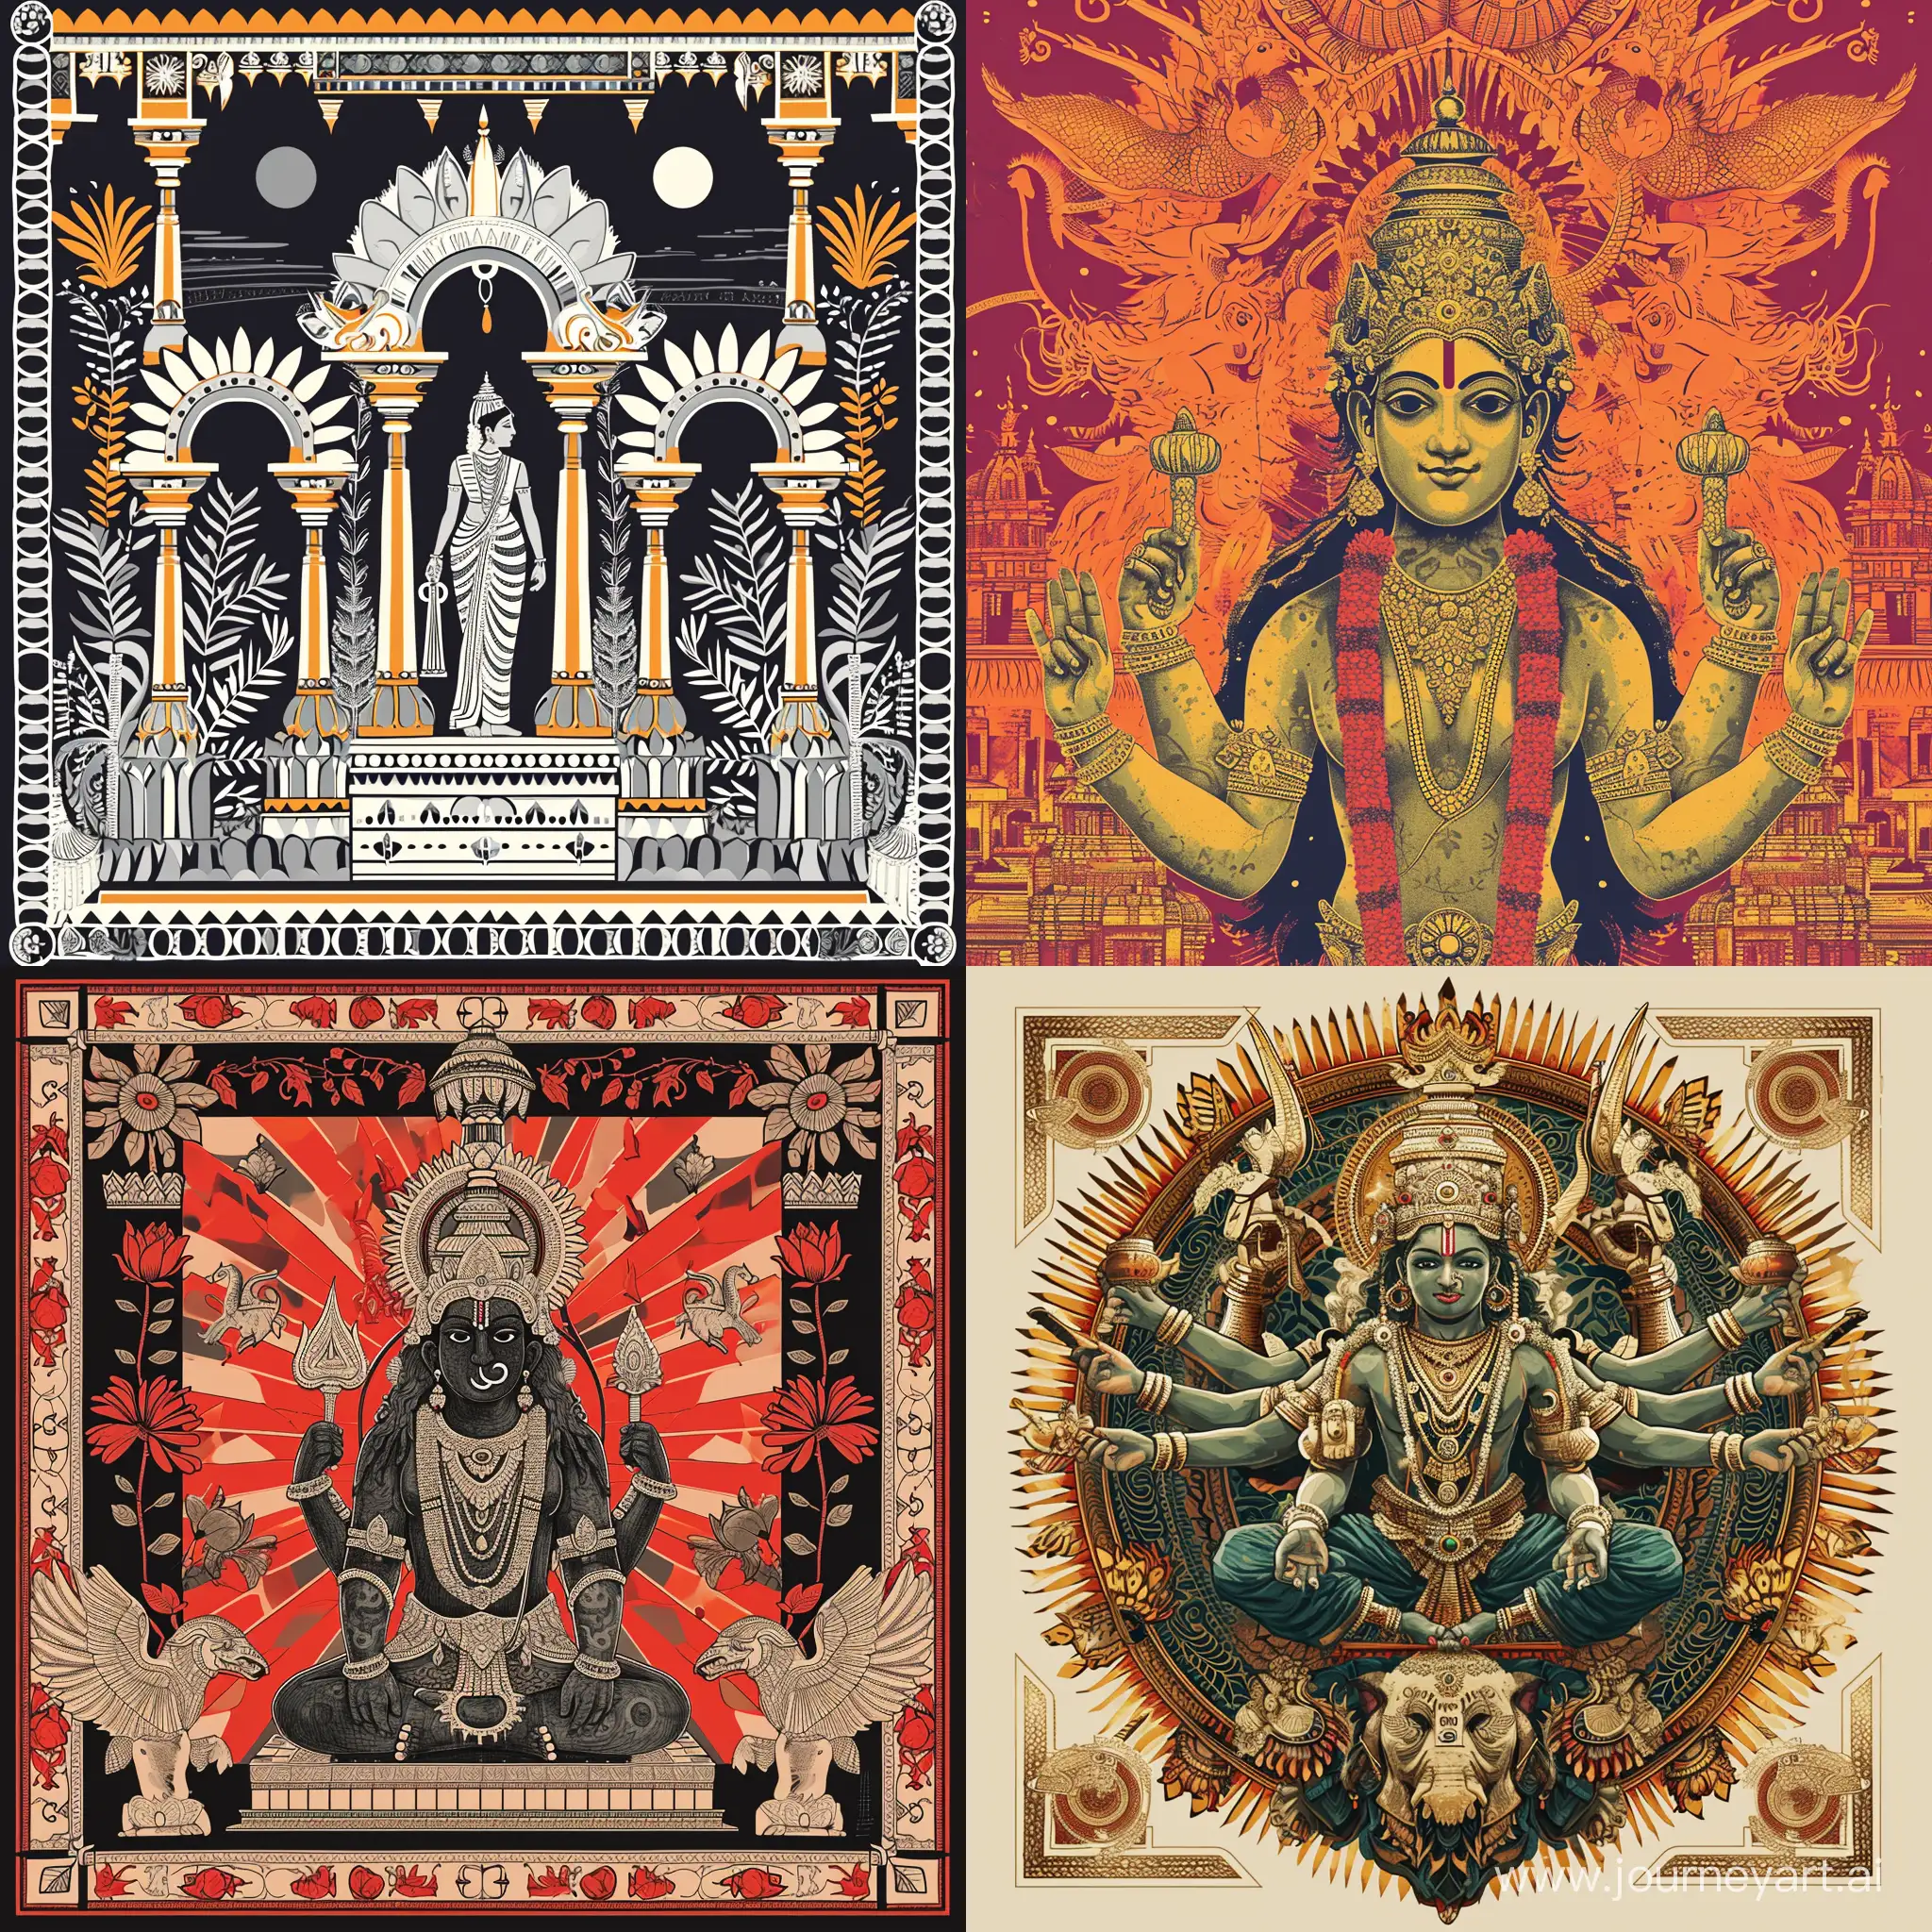 ancient Hindu glory and history, bold and creative intricate illustration